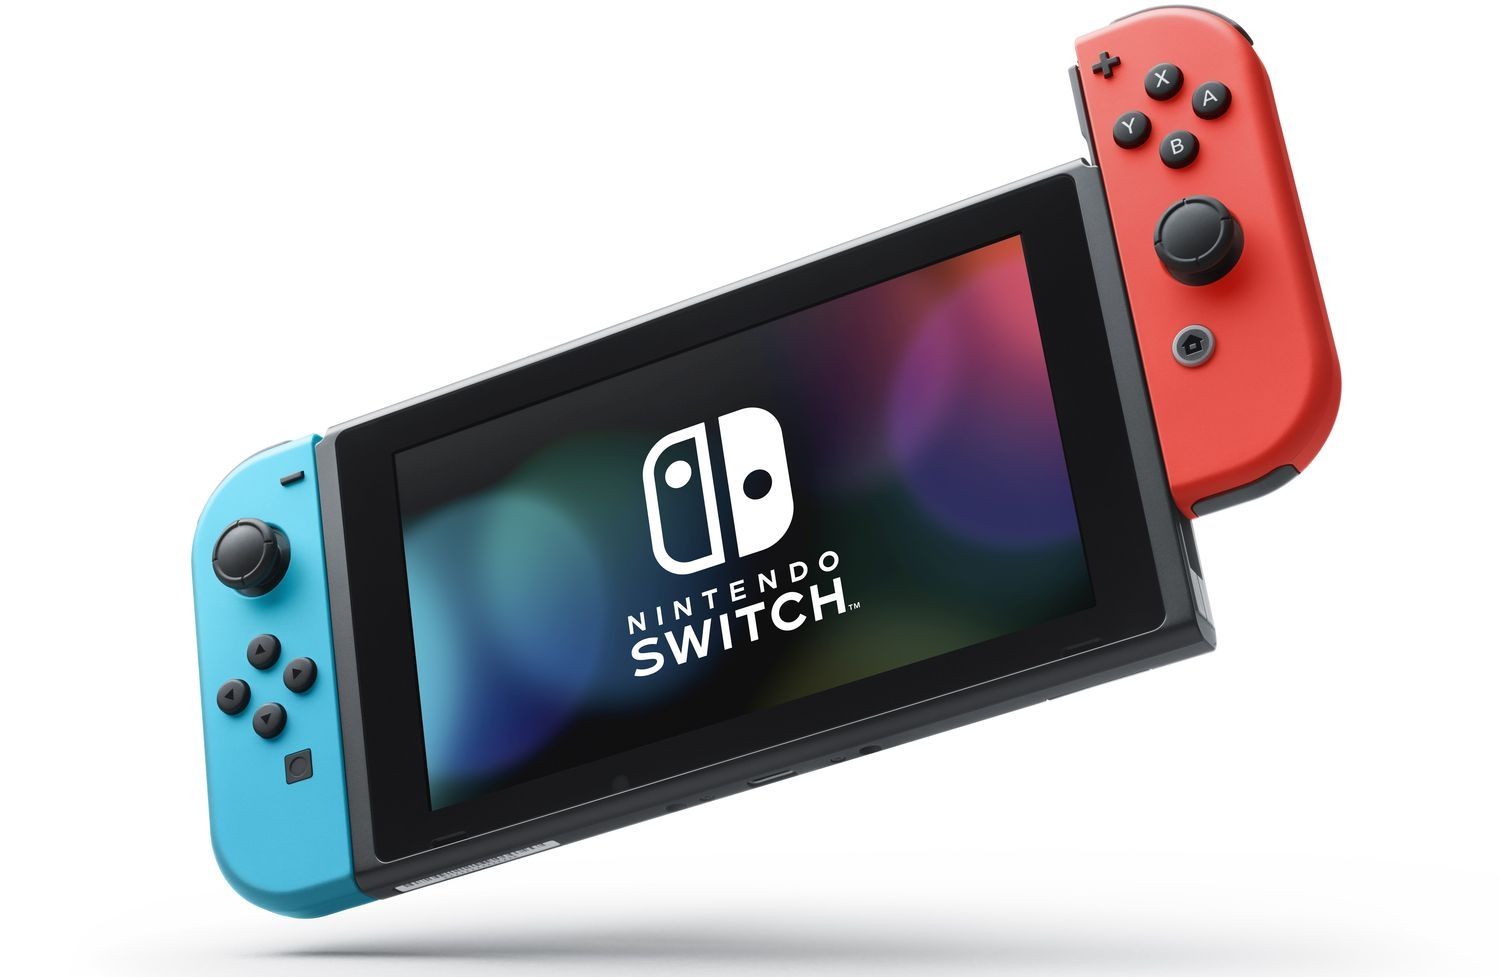 Nintendo Switch - Red & Blue - 4